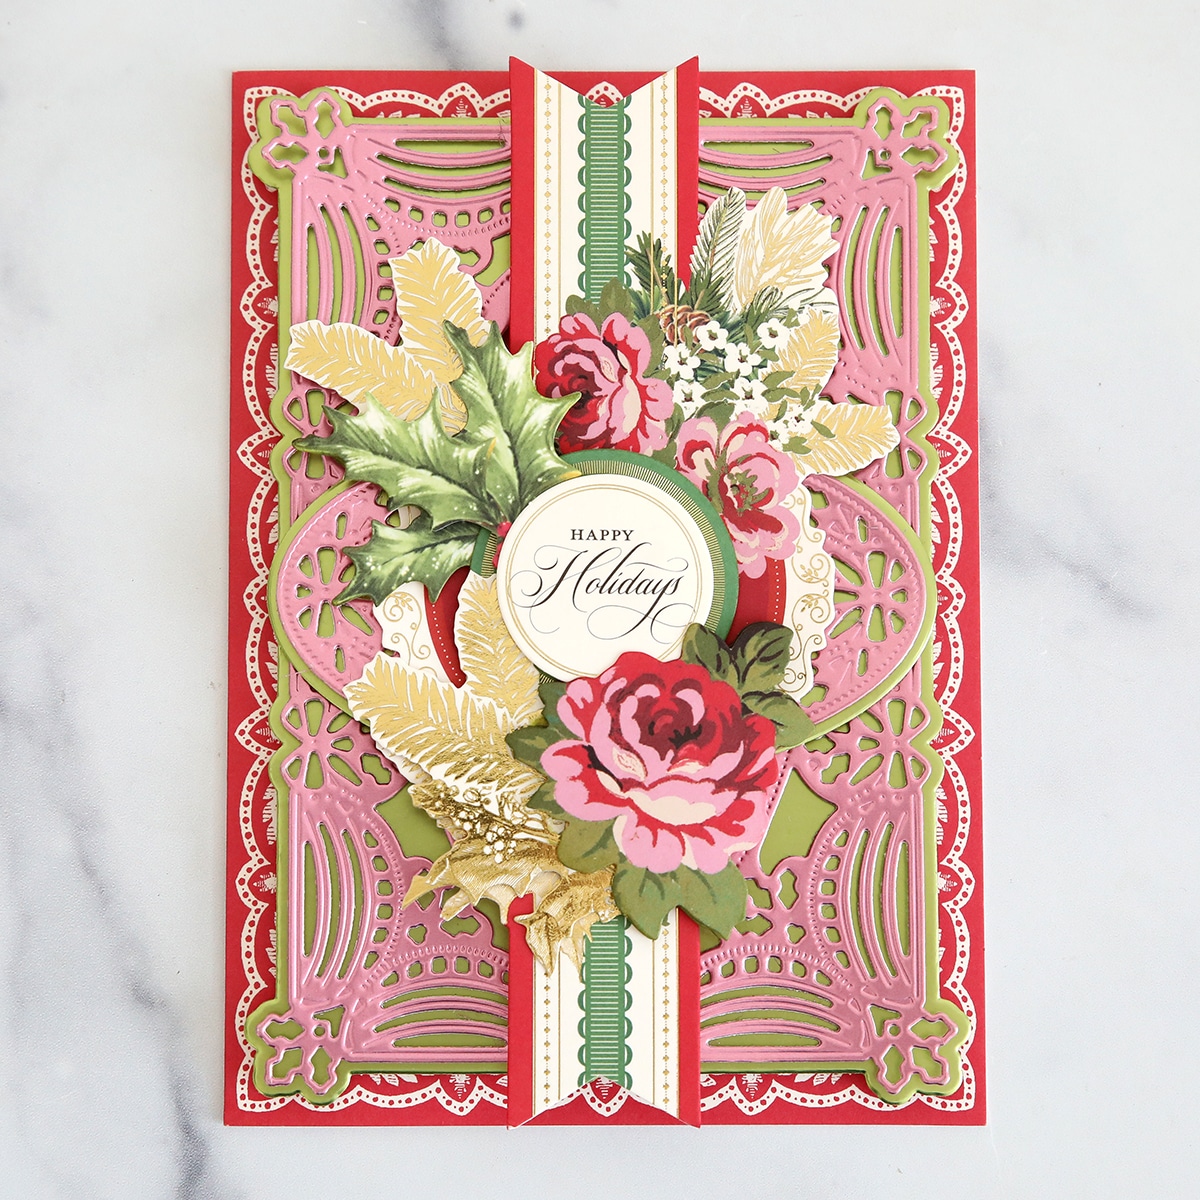 A pink and gold card with a floral design.